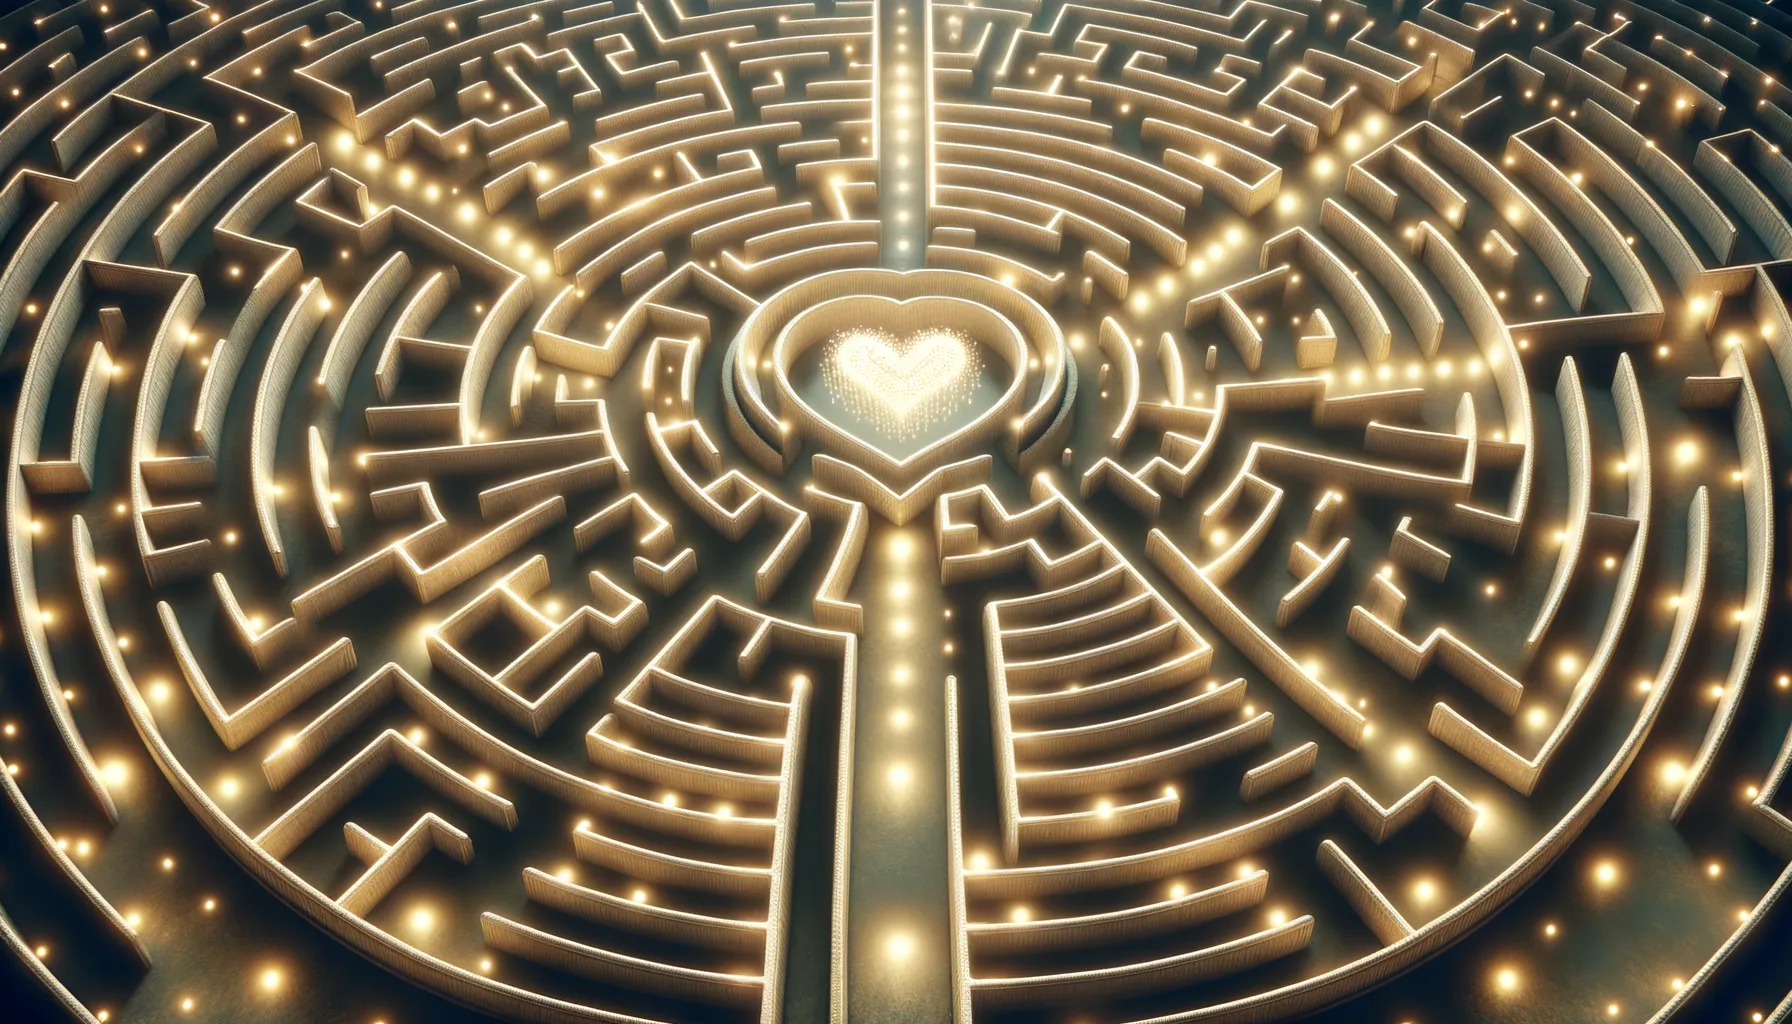 As the winding paths of the labyrinth unfold before us, each glowing turn represents the enlightening journey toward love, reminding us that every step—no matter how convoluted—brings us closer to the heart's true destination.